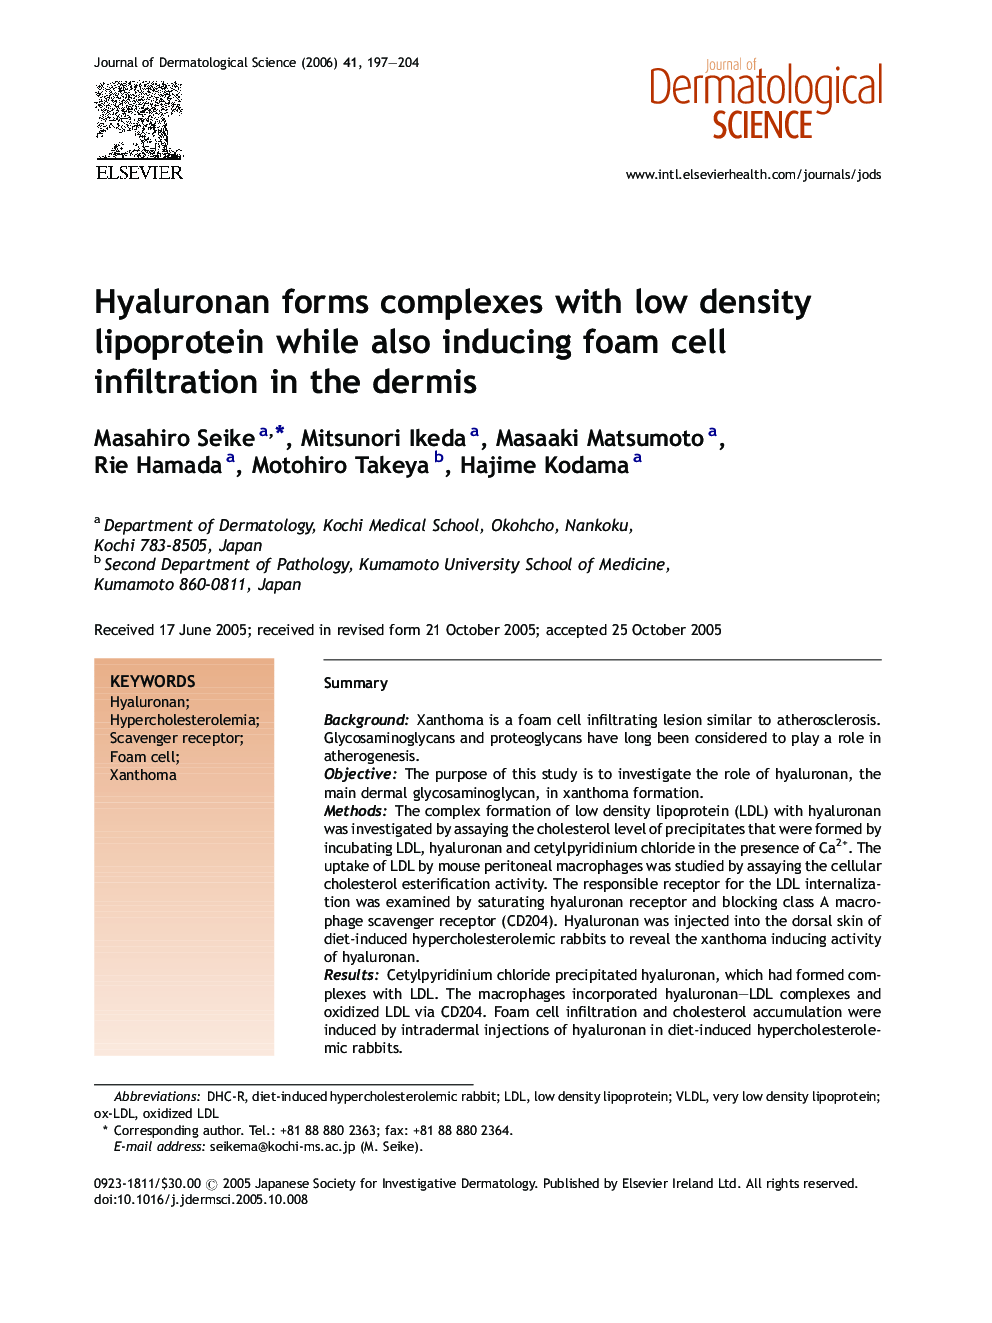 Hyaluronan forms complexes with low density lipoprotein while also inducing foam cell infiltration in the dermis